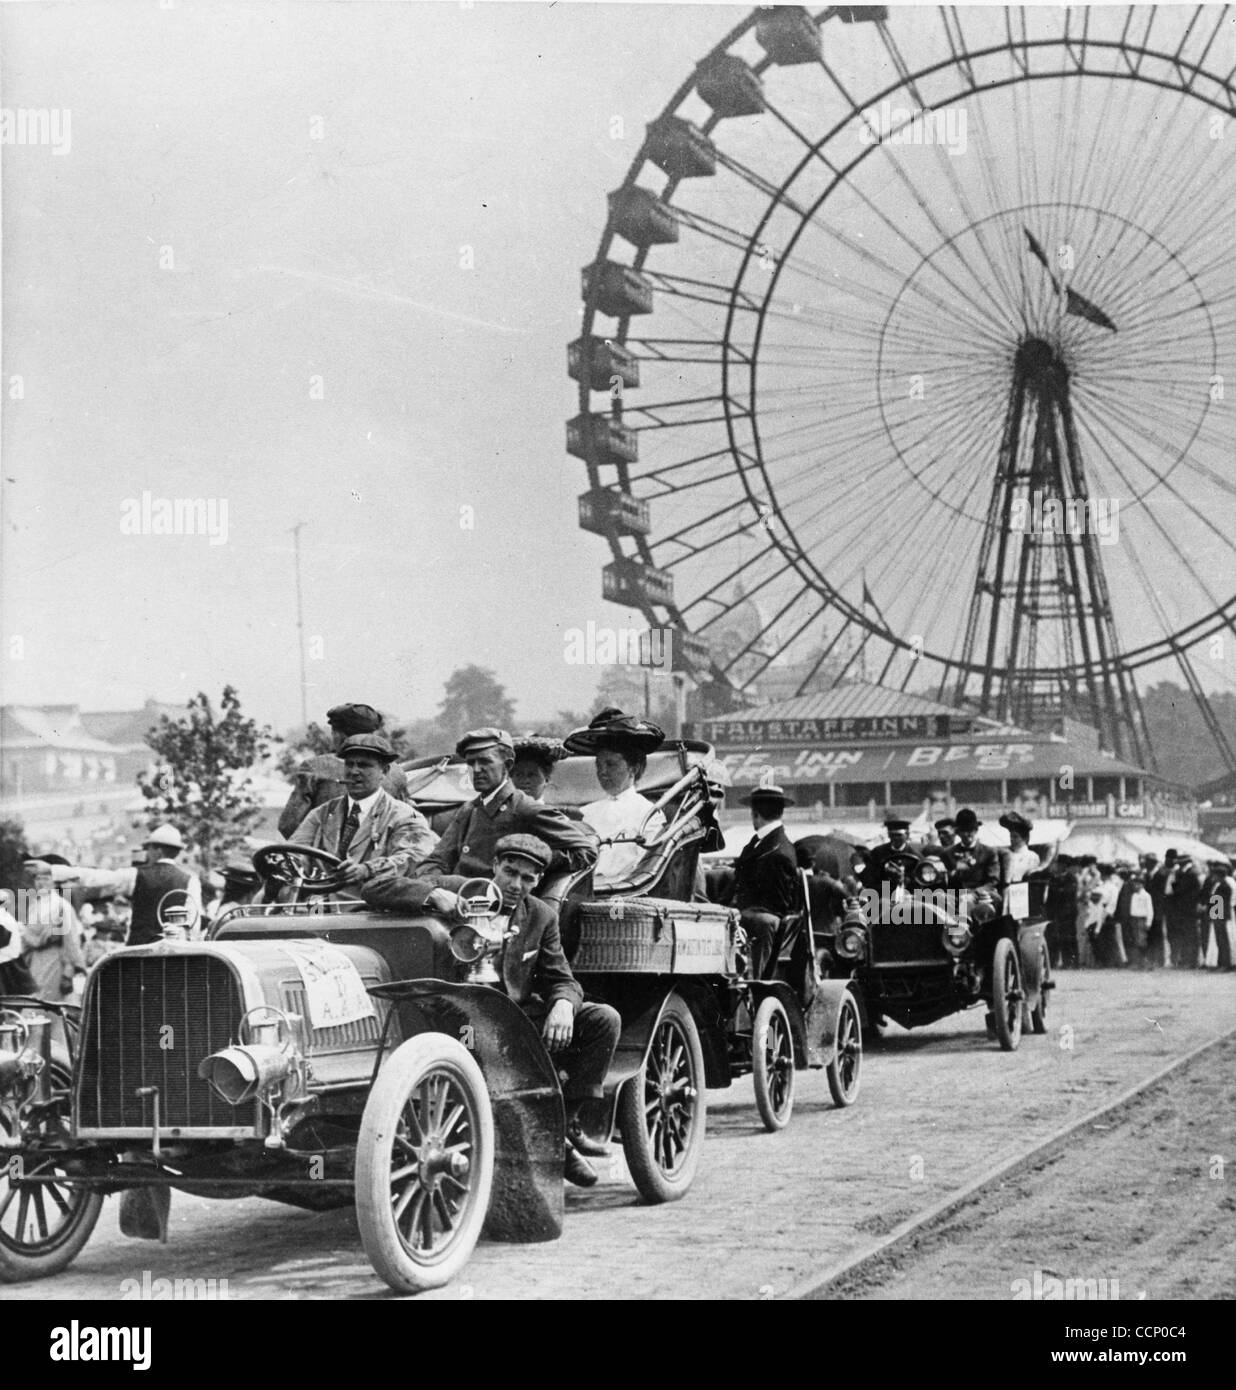 May 1, 1904 - St. Louis, MI, U.S. - From New York to St. Louis the Automobile Parade during the St. Louis World's Fair, 1904. (Credit Image: © KEYSTONE Pictures USA/ZUMAPRESS.com) Stock Photo